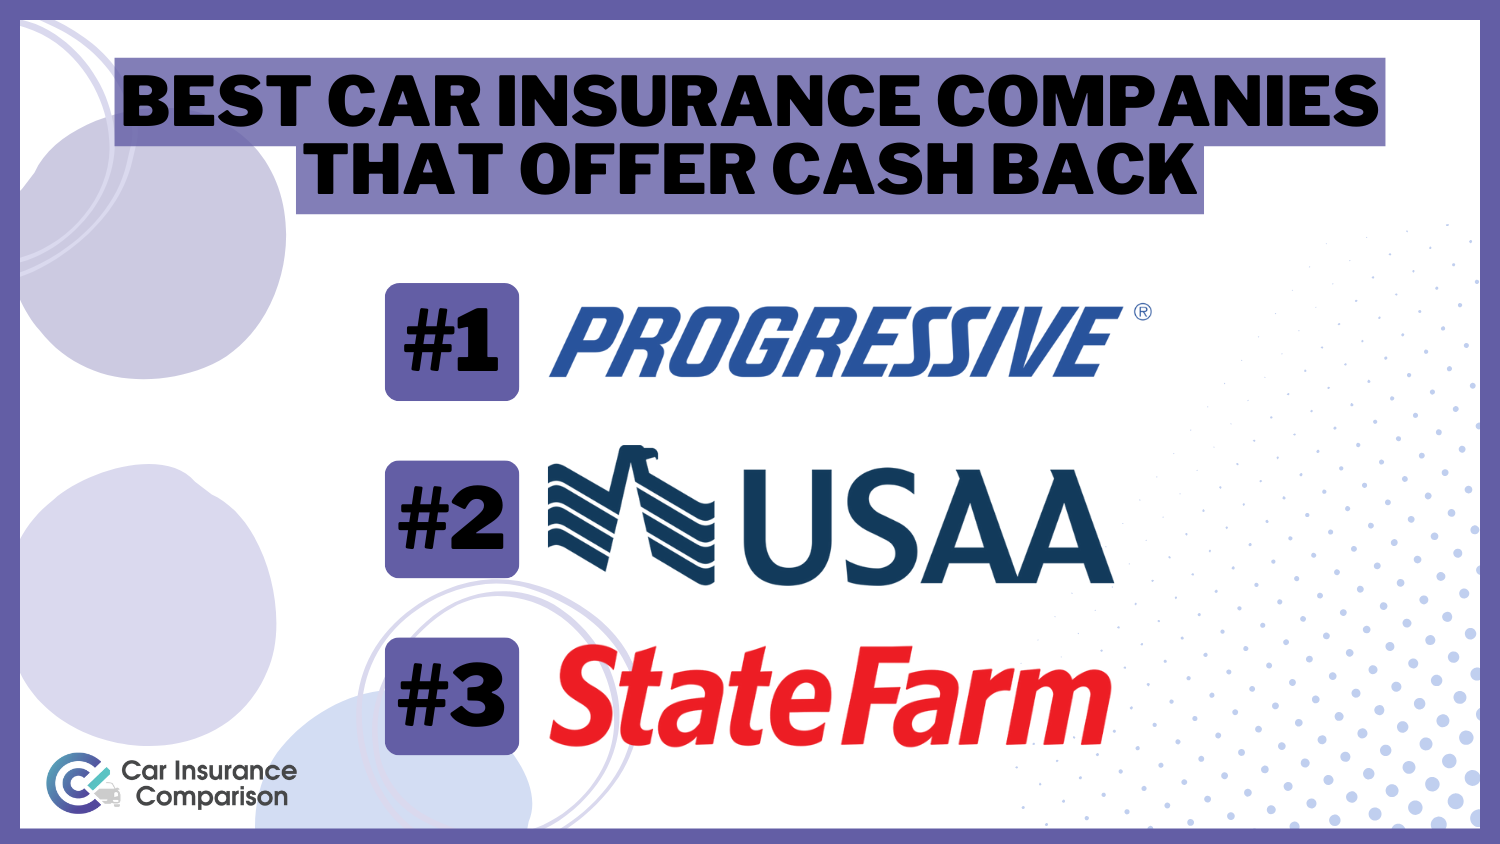 Progressive, USAA, and State Farm: Best Car Insurance Companies That Offer Cash Back